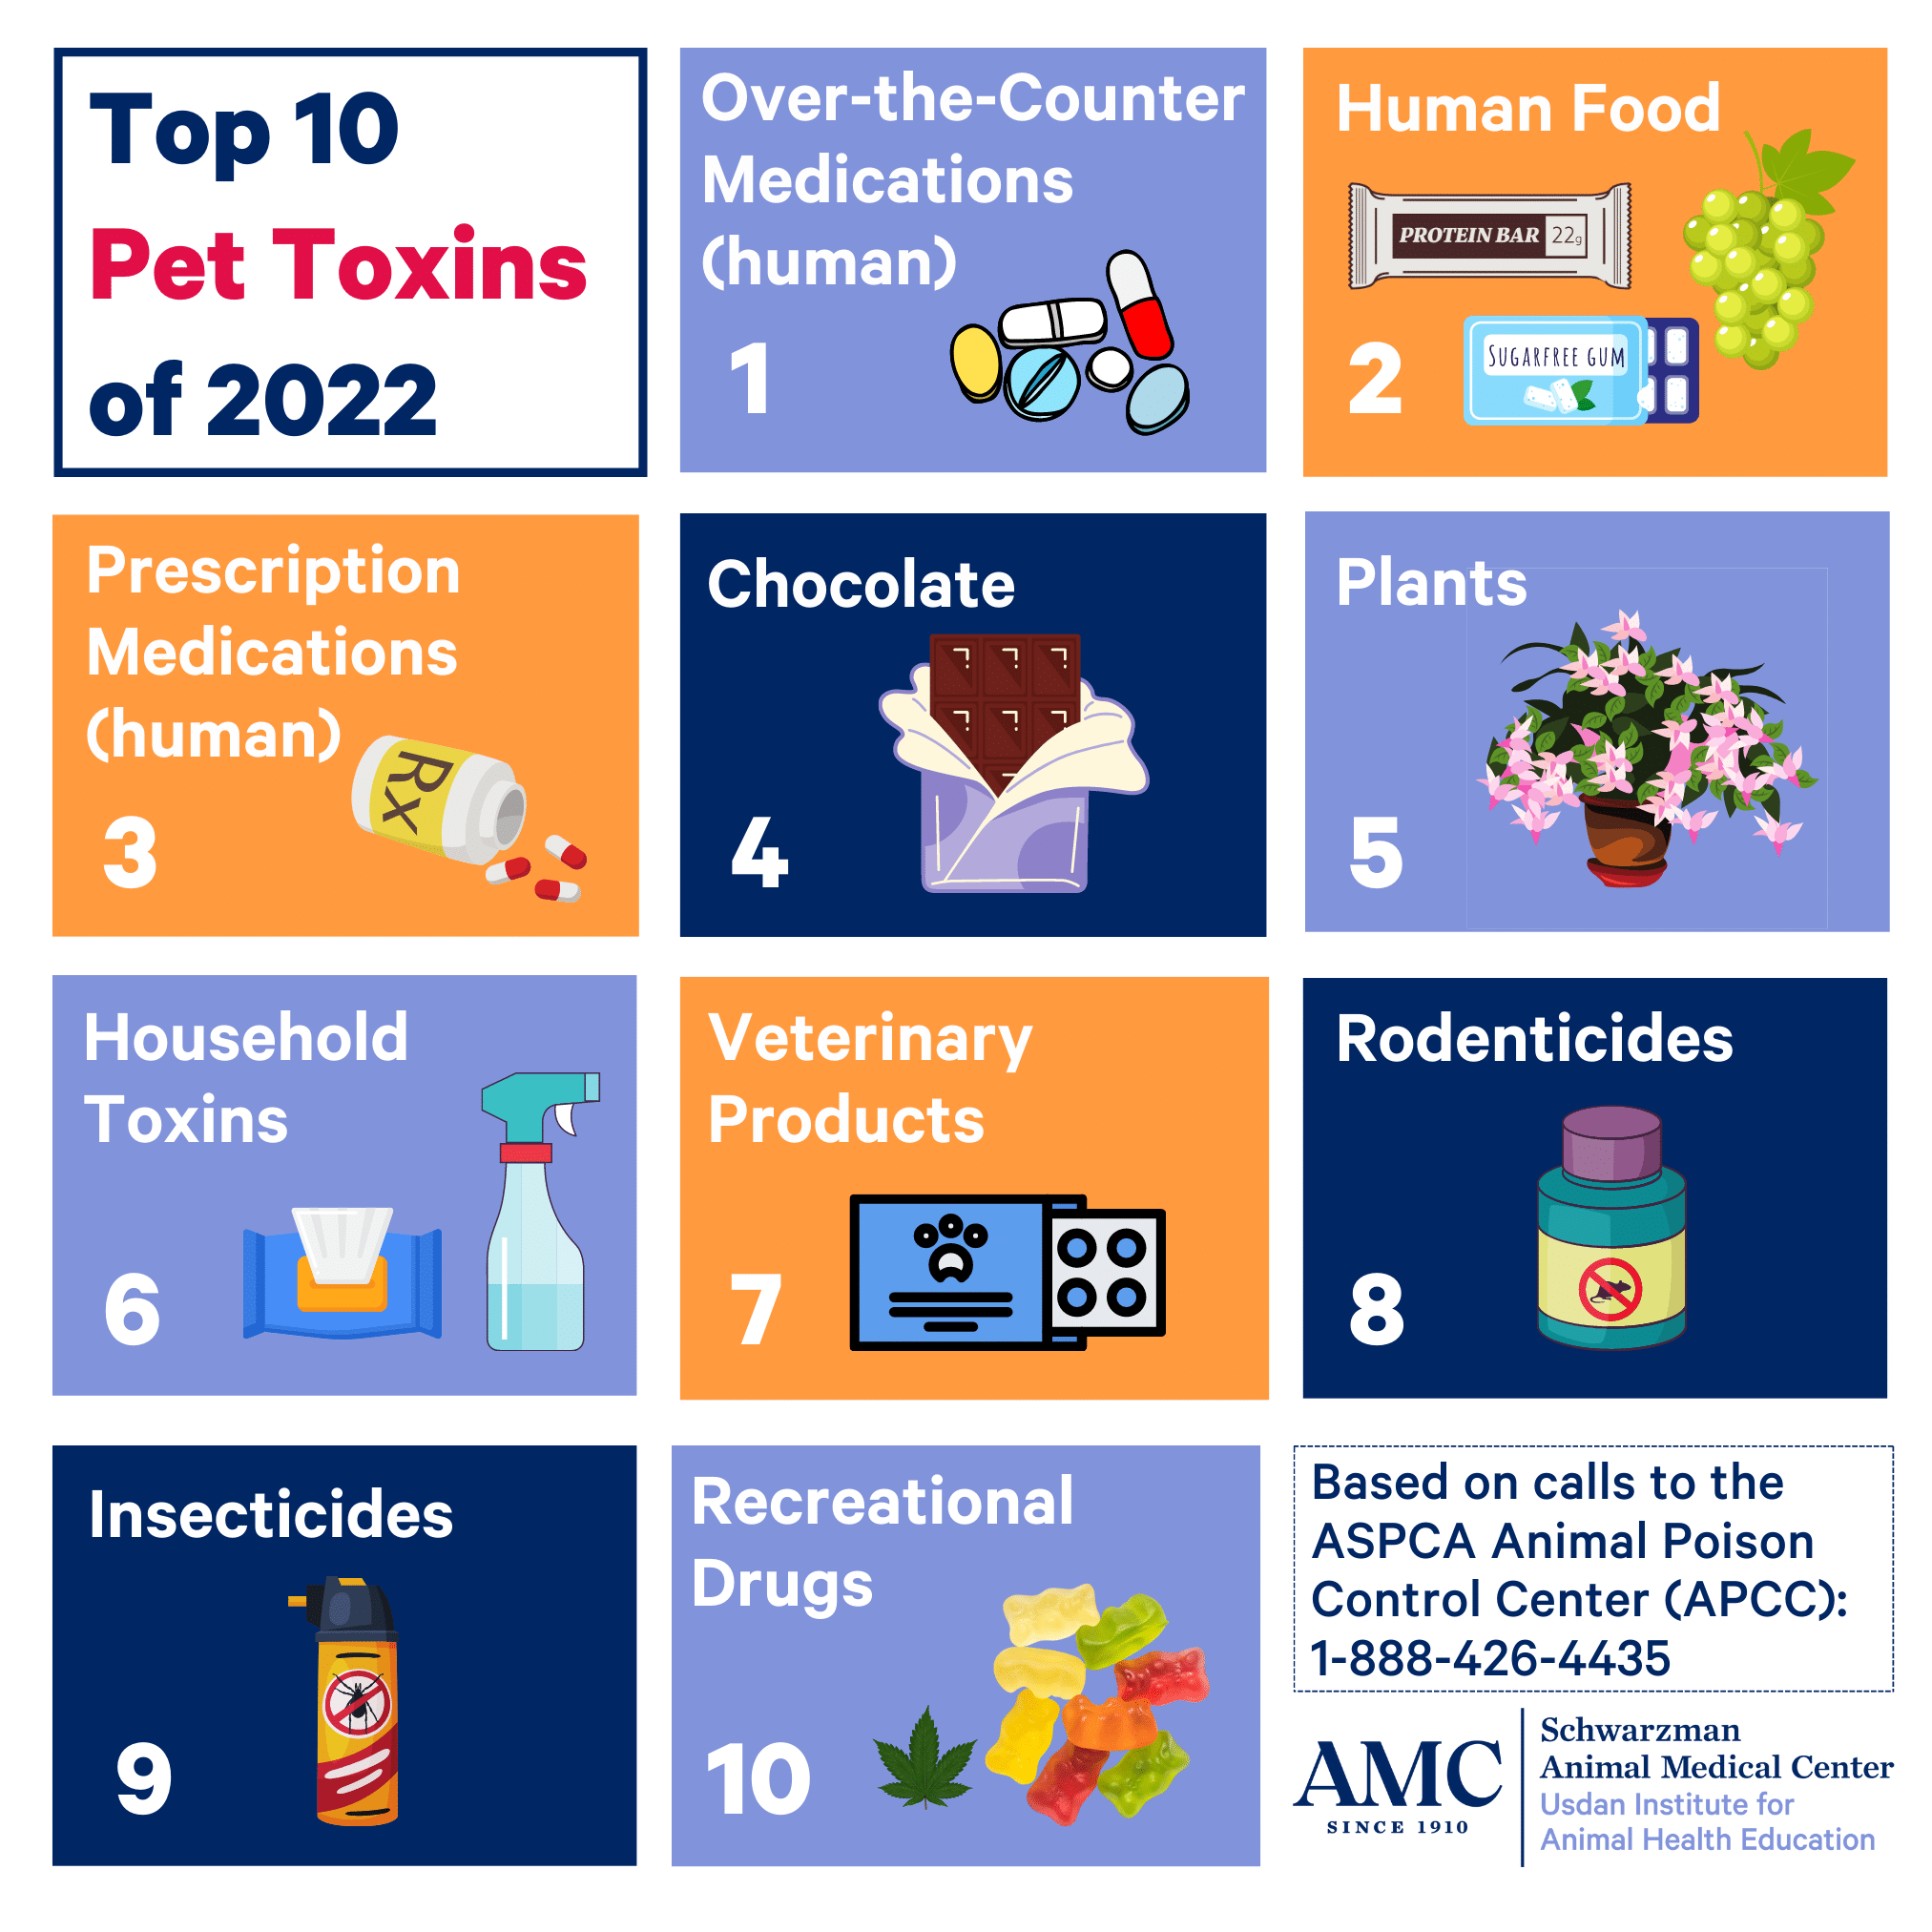 Top 1- Pet Toxins for 2022: 1. Over-the-Counter Medications 2. Human Food 3. Prescription Medications (human) 4. Chocolate 5. Plants 6. Household Toxins 7. Veterinary Products 8. Rodenticides 9. Insecticides 10. Recreational Drugs